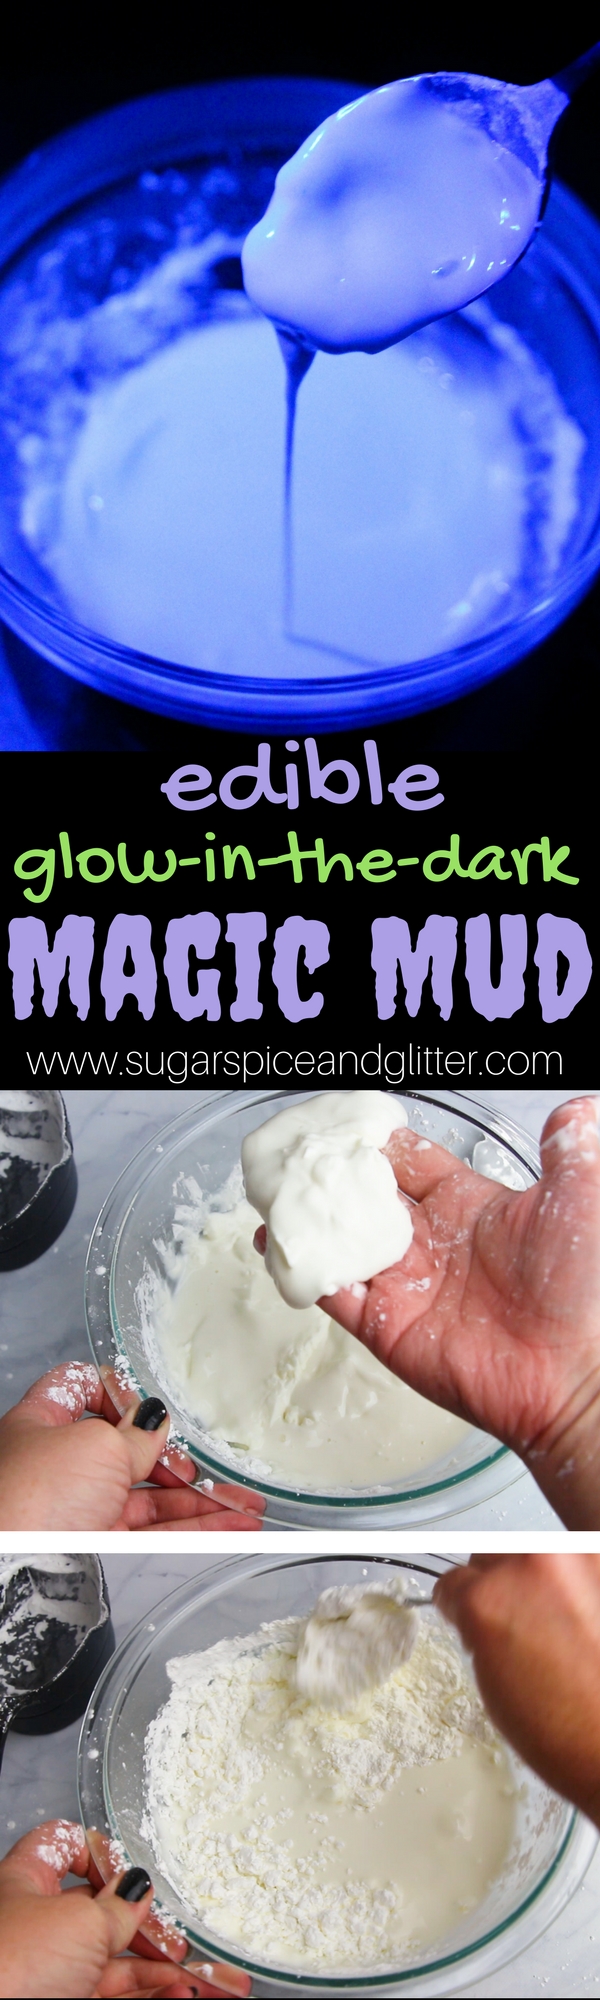 An edible glow-in-the-dark sensory activity for kids - EDIBLE MAGIC MUD! A fun take on the edible slime craze that needs just two ingredients - plus a fun hack to turn your phone into a blacklight. Glow in the dark oobleck